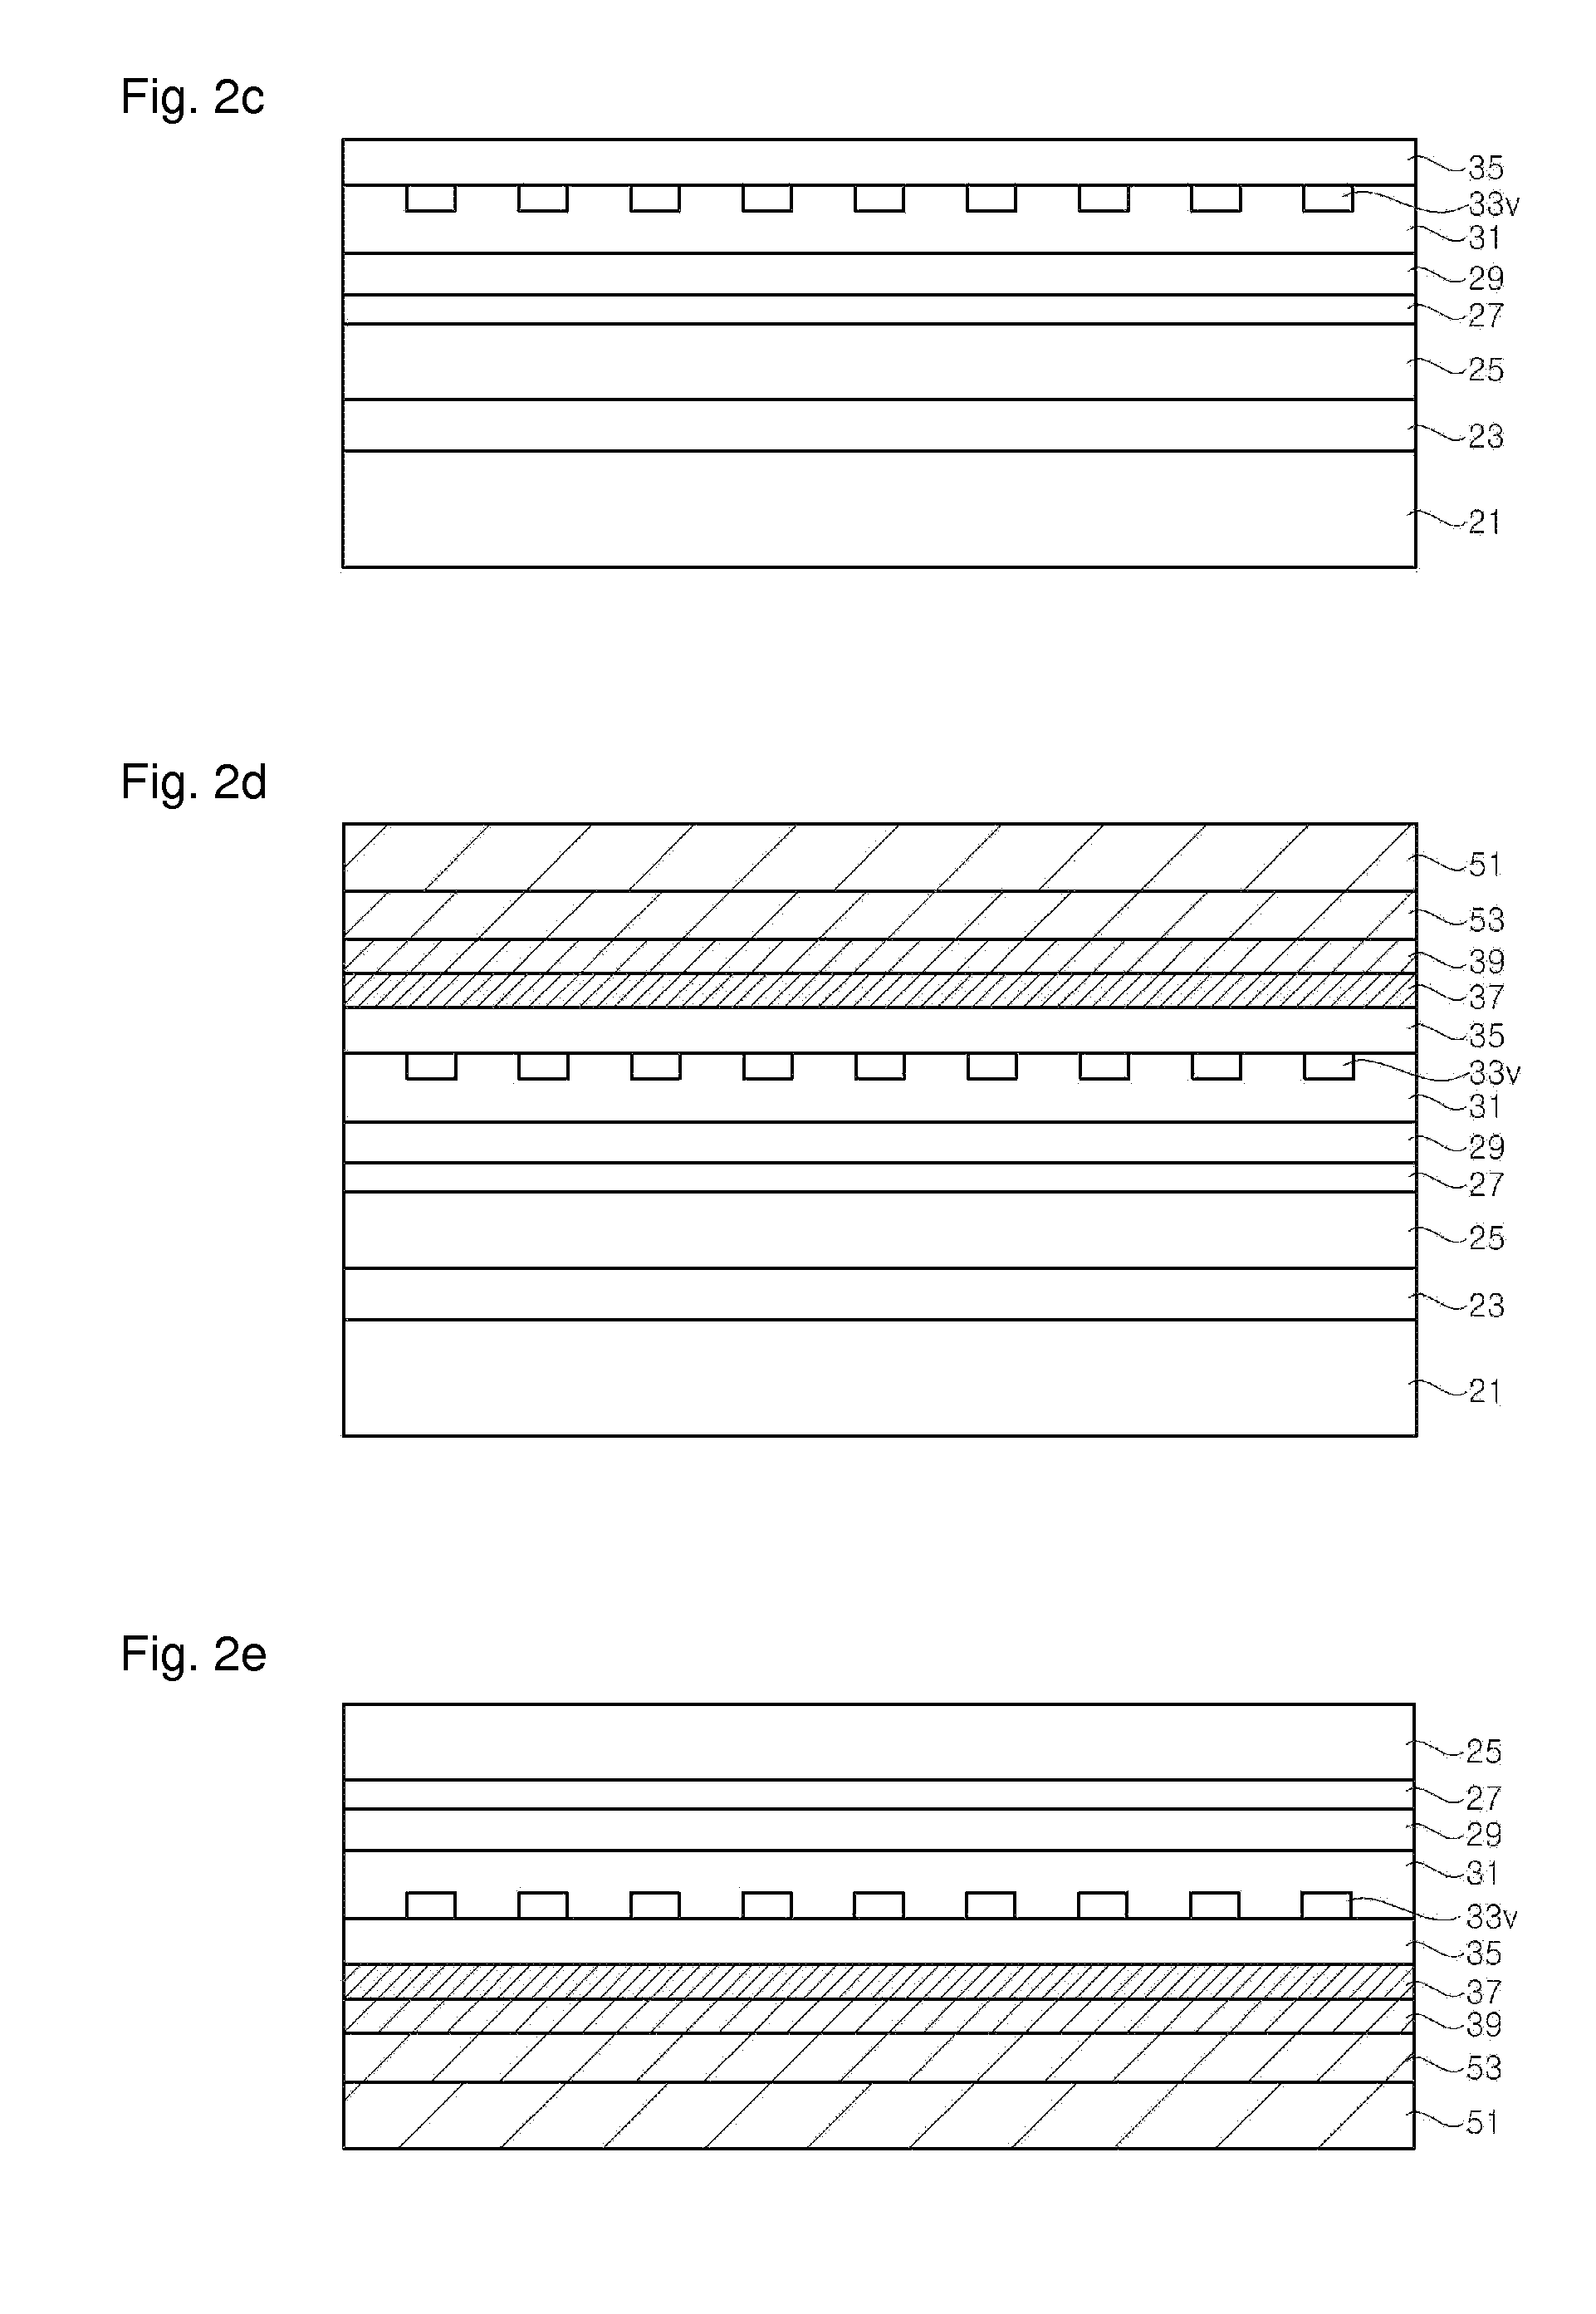 Non-polar light emitting diode having photonic crystal structure and method of fabricating the same